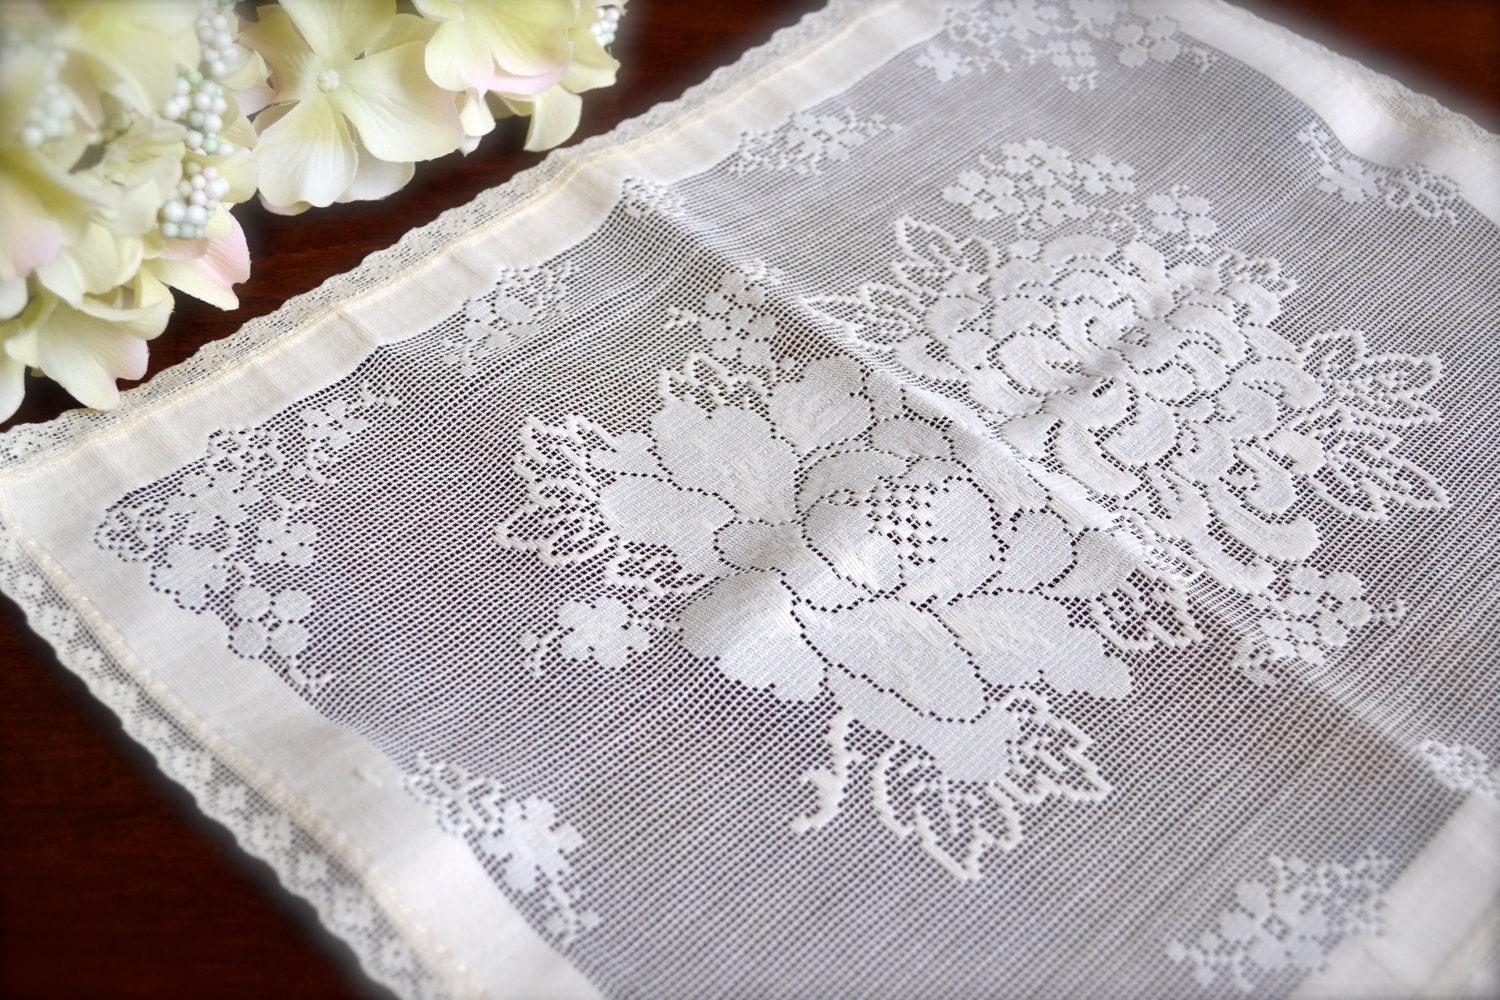 Lace Vintage runners LaBellaVintage etsy Dresser Runner Table  table by vintage Scarf Doily